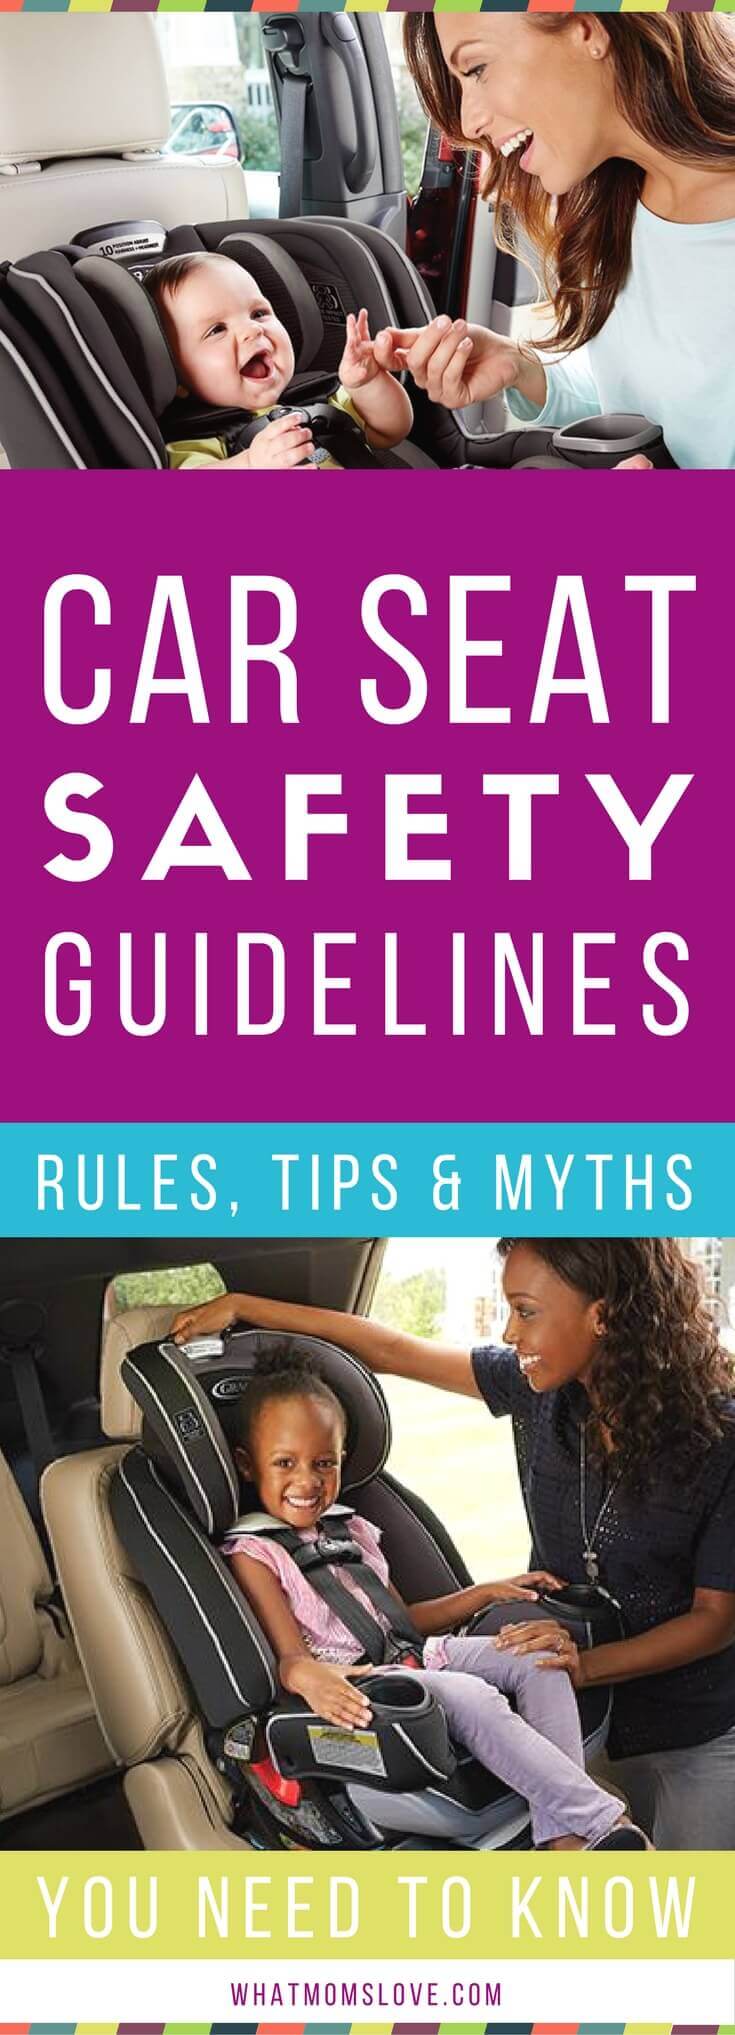 https://cdn.whatmomslove.com/wp-content/uploads/2017/09/car-seat-safety-guidelines-PIN-sml.jpg